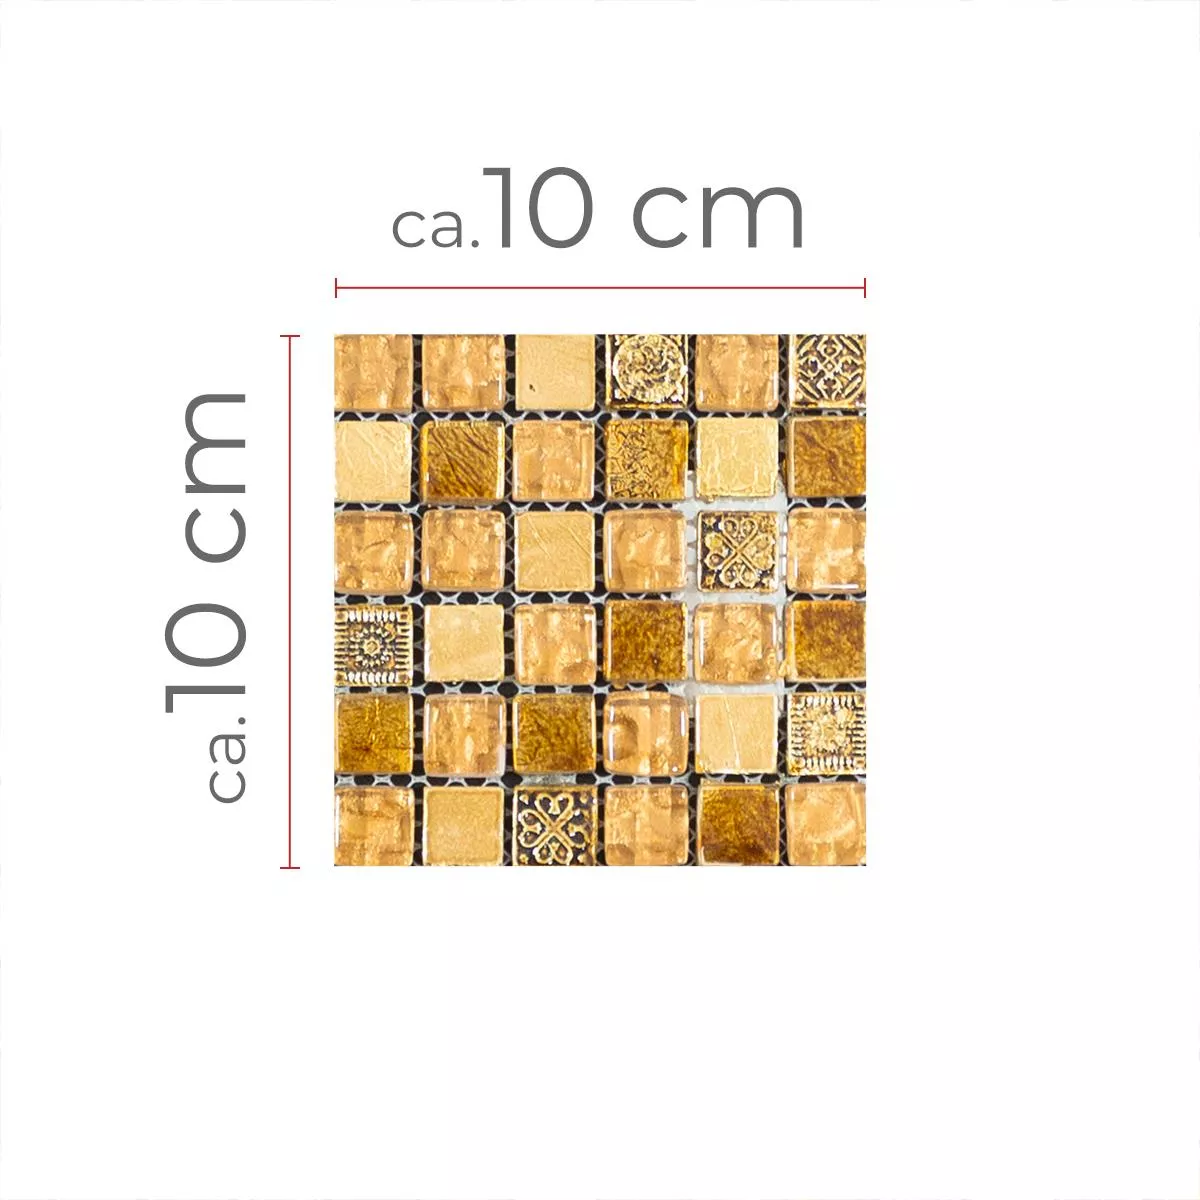 Sample Glass Marble Mosaic Tiles Majestic Beige Gold